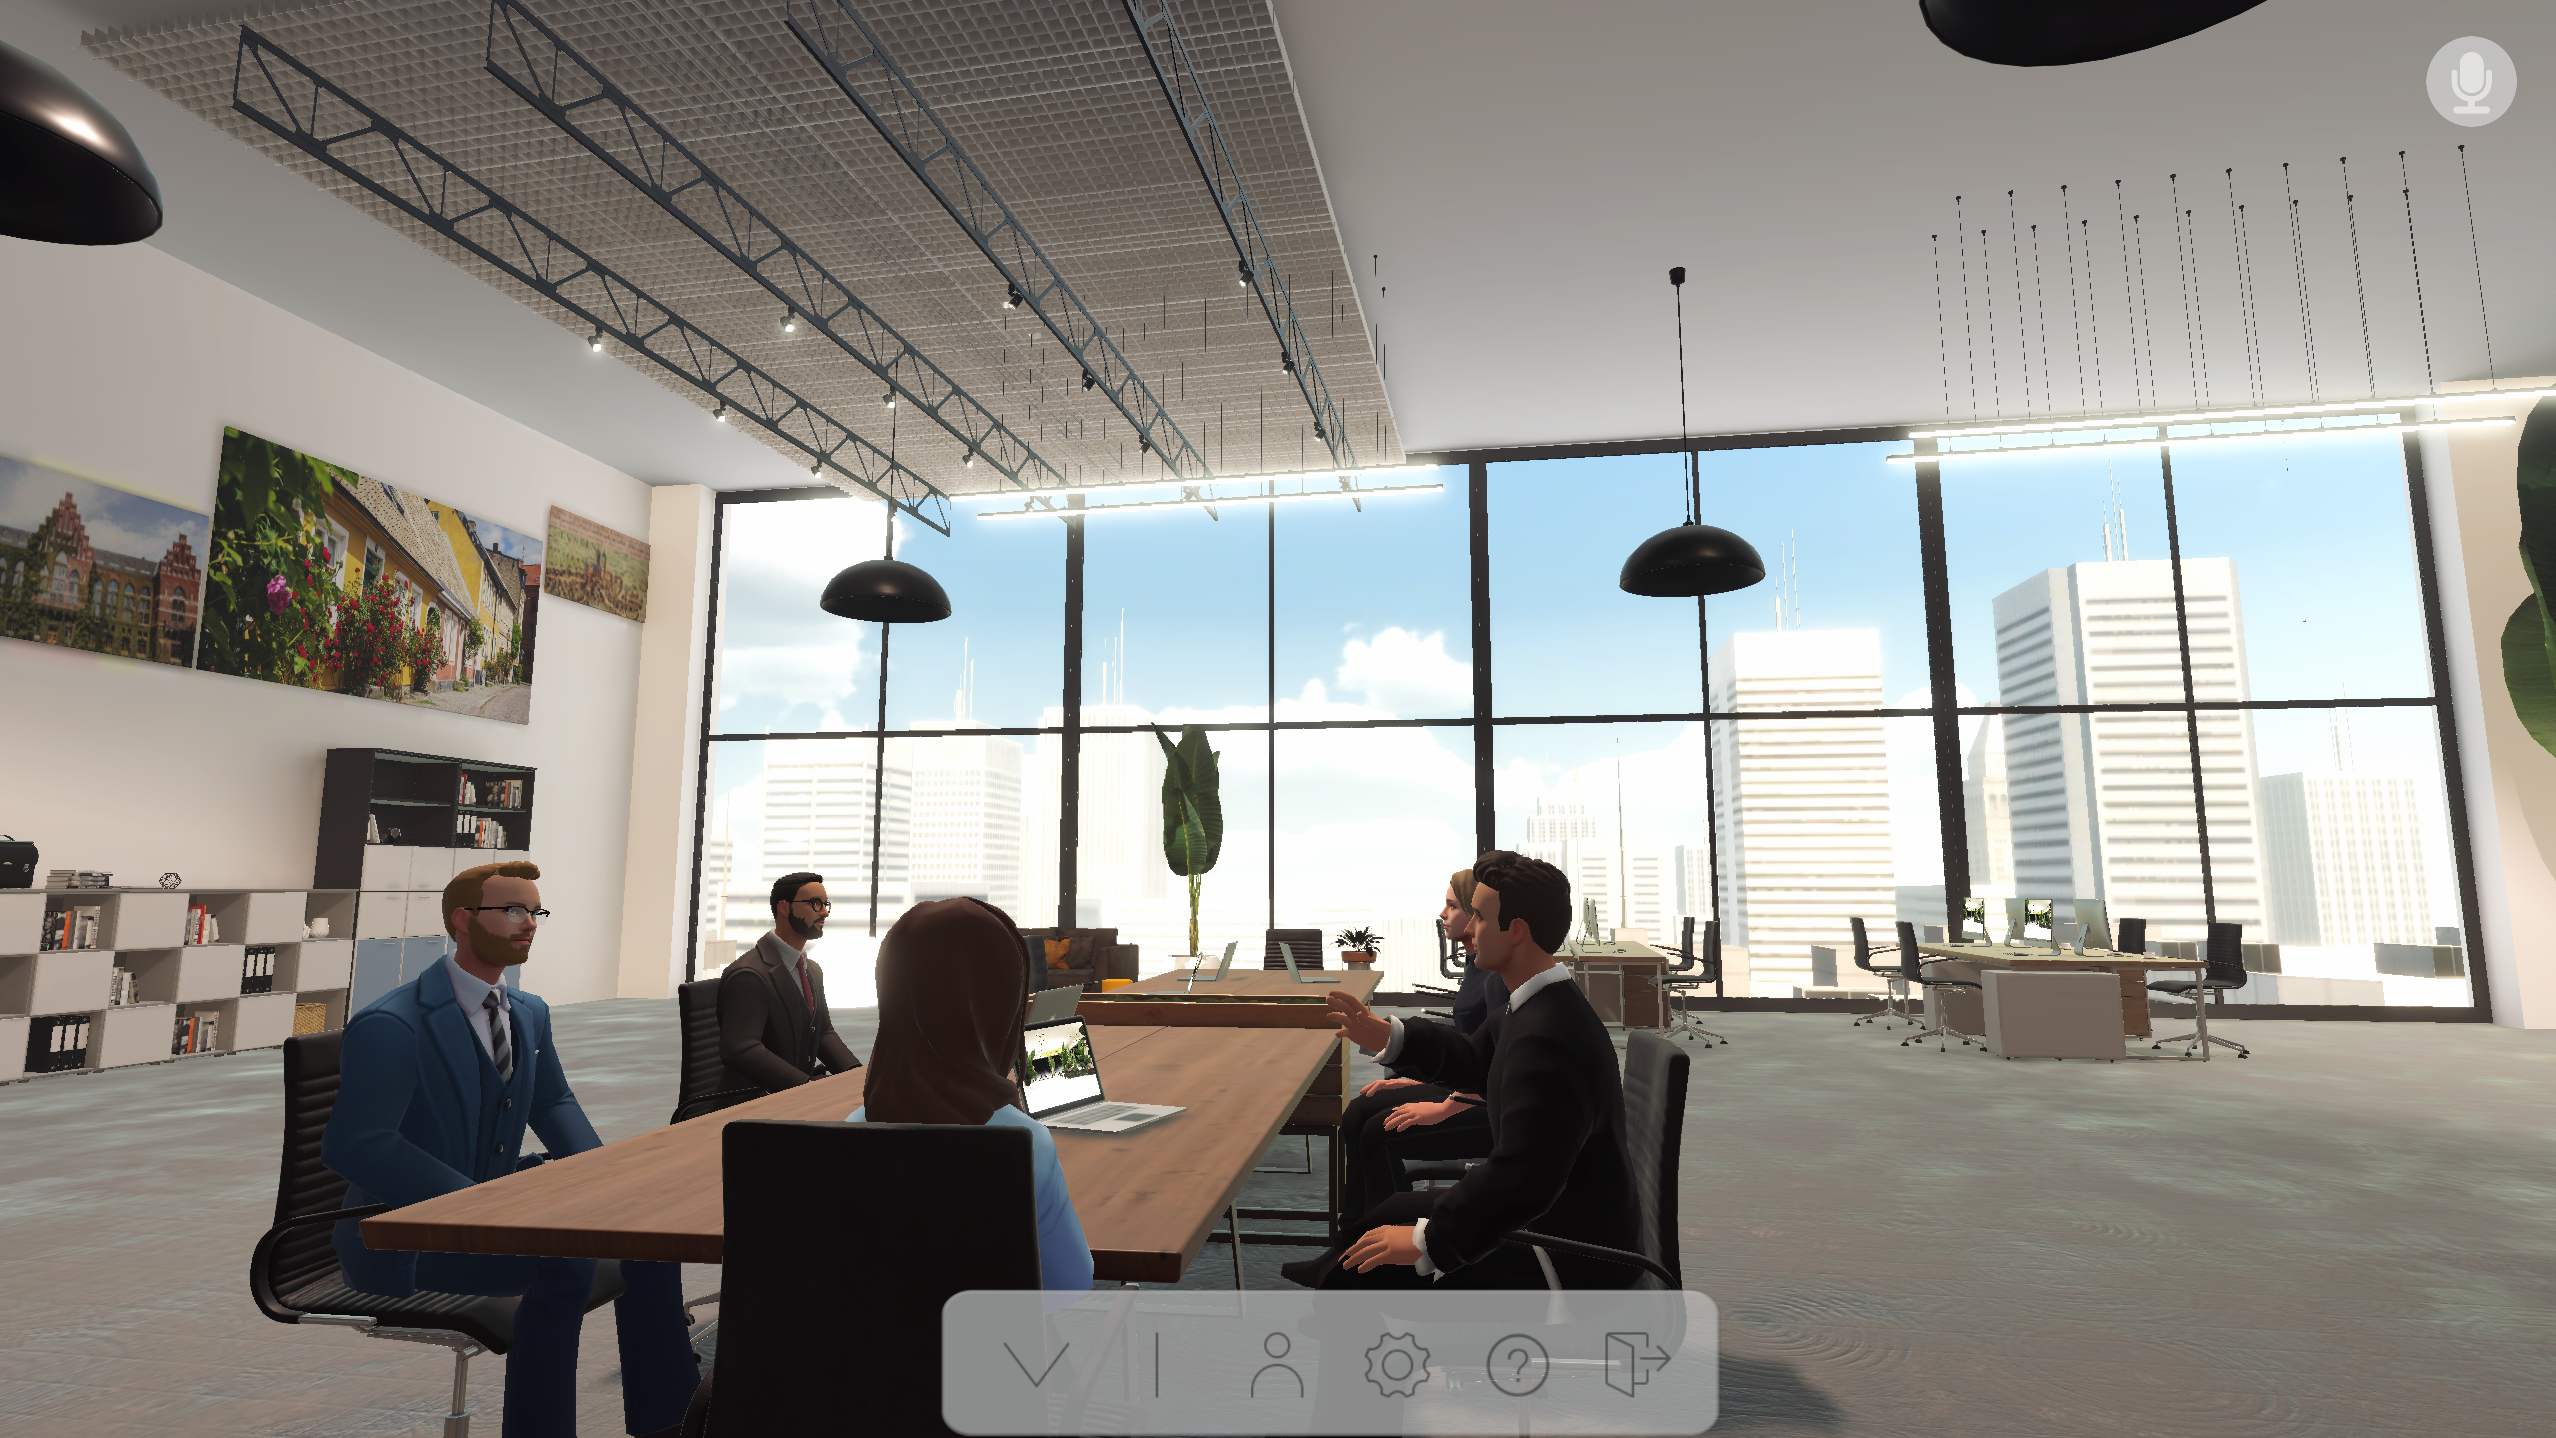 An image of avatars sitting at a table in a ReSocialize virtual office. The remote office is inspiring and bright, andthe far wall is covered with floor-to-ceiling windows that show a bright day and tall buildings outside. It is clearly a metaverse work meeting for remote work. Virtual Office Free Trial Webinar Moderator Webinar Hosting Costs Digital Nomad Tools Join A Webinar Businesses Use Webinars For The Following Reasons Except Seminar And Webinar Difference Online Co Working Space Seminar Vs Webinar Online Co-working Spaces metaverse meetings Cost of webinar How to Create a Virtual Office Networking At A Webinar Set Up Virtual Office Virtual Co Working Space Online Webinar Audio Review Remote Collaboration Tools Online Meeting Tools Metaverse Meeting Platform Remote Work Office Virtual Conferences and Events Host Better Webinars Remote Work Solutions Virtual Networking Platform Hosting A Webinar Remote Team Building How to host webinar Set Up Webinar Virtual Reality Office Digital Office Space Virtual Office Virtual Meeting Platform How to work remote Online Office